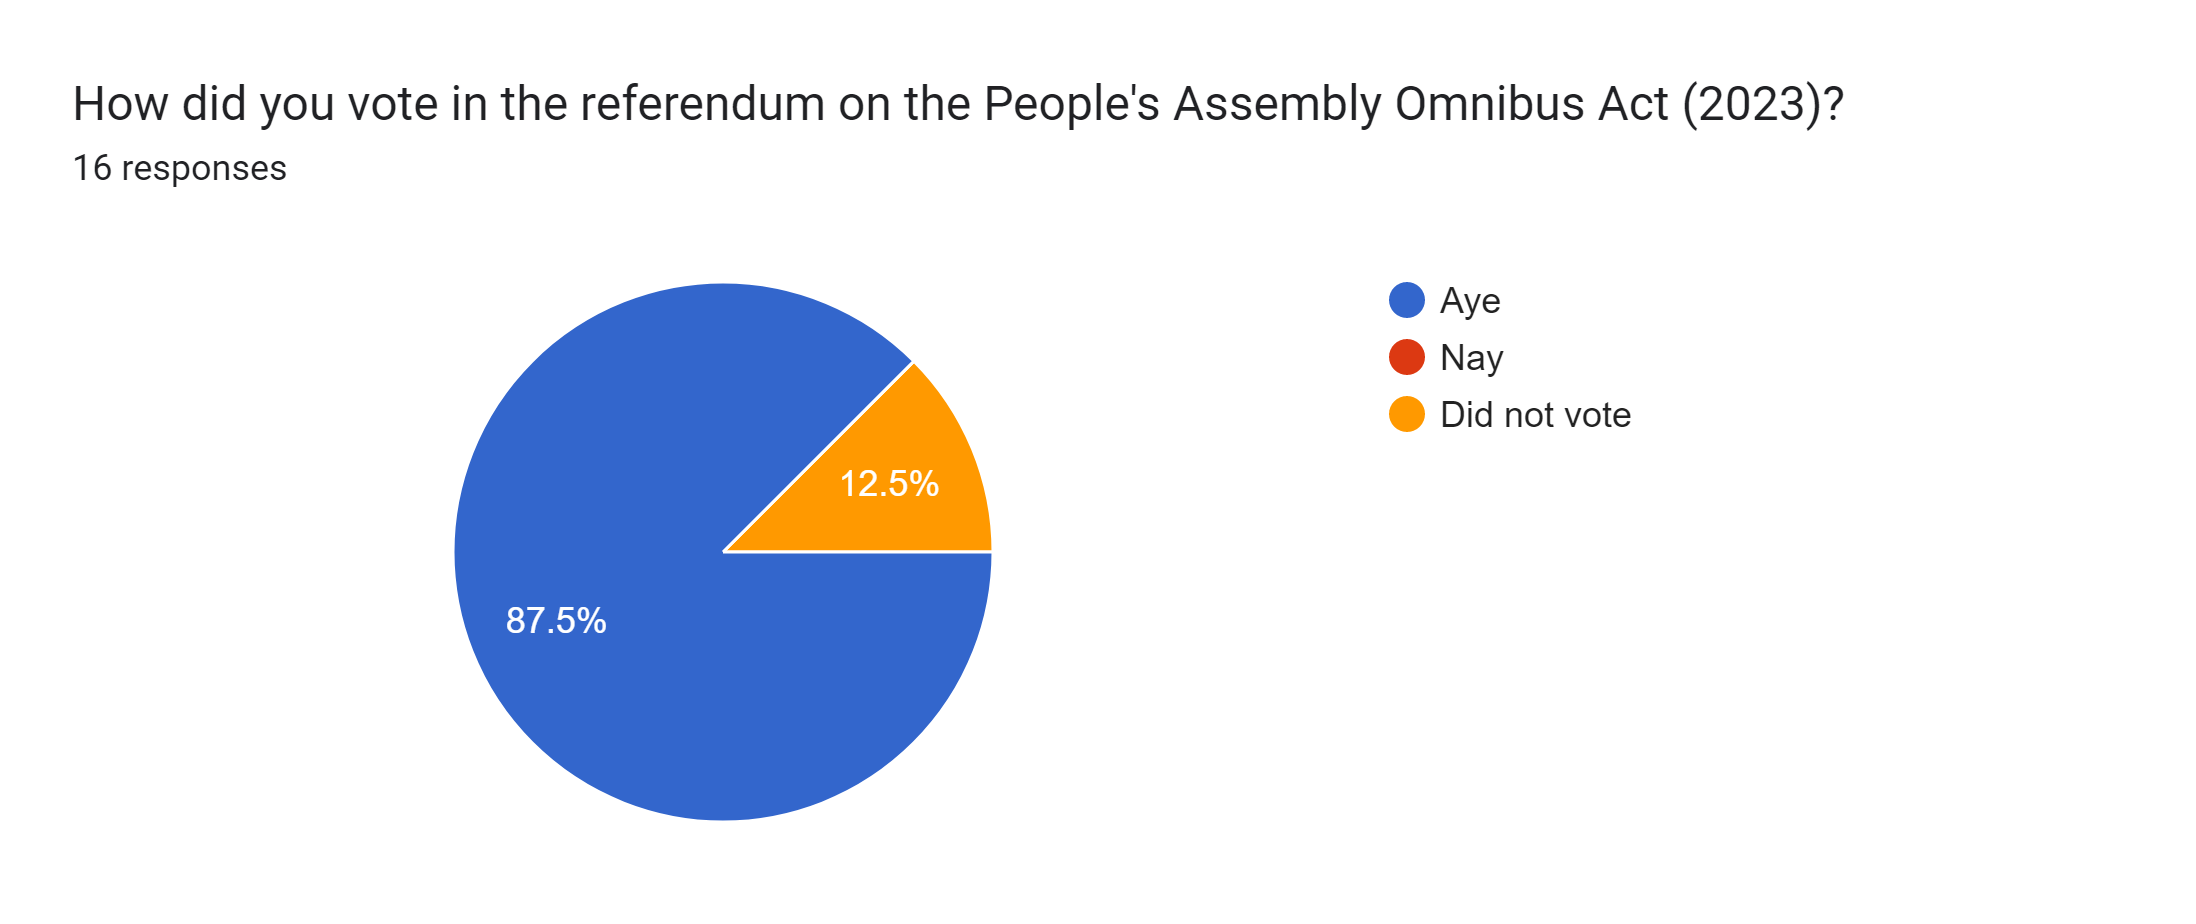 Forms response chart. Question title: How did you vote in the referendum on the People's Assembly Omnibus Act (2023)?. Number of responses: 16 responses.